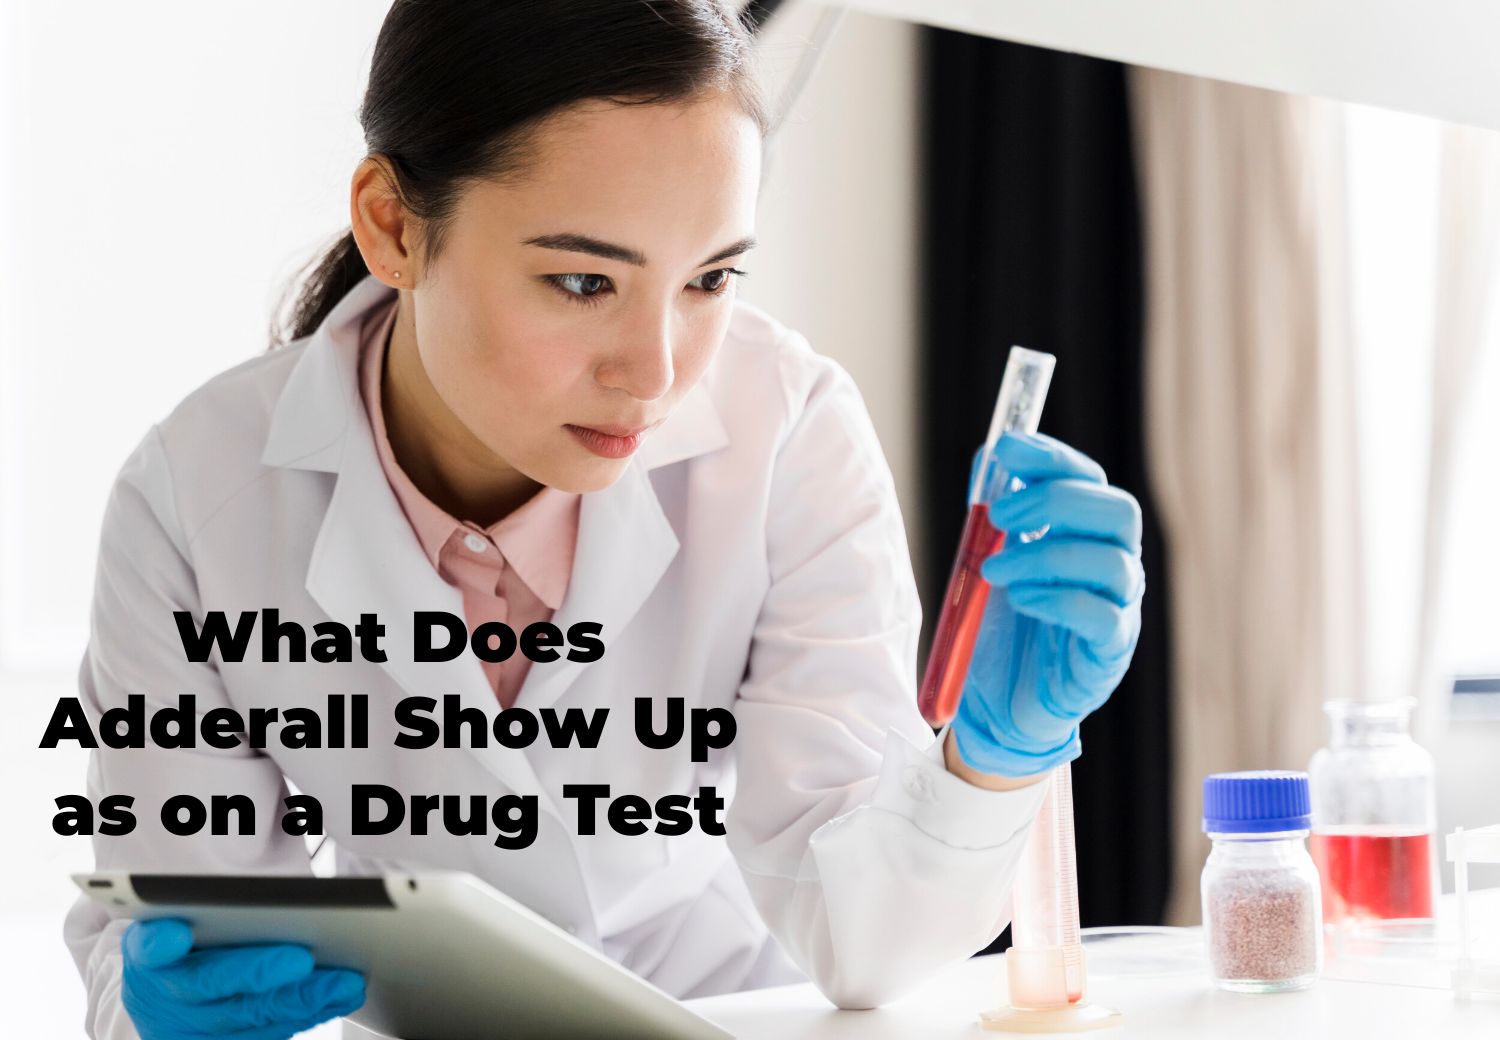 What Does Adderall Show Up as on a Drug Test